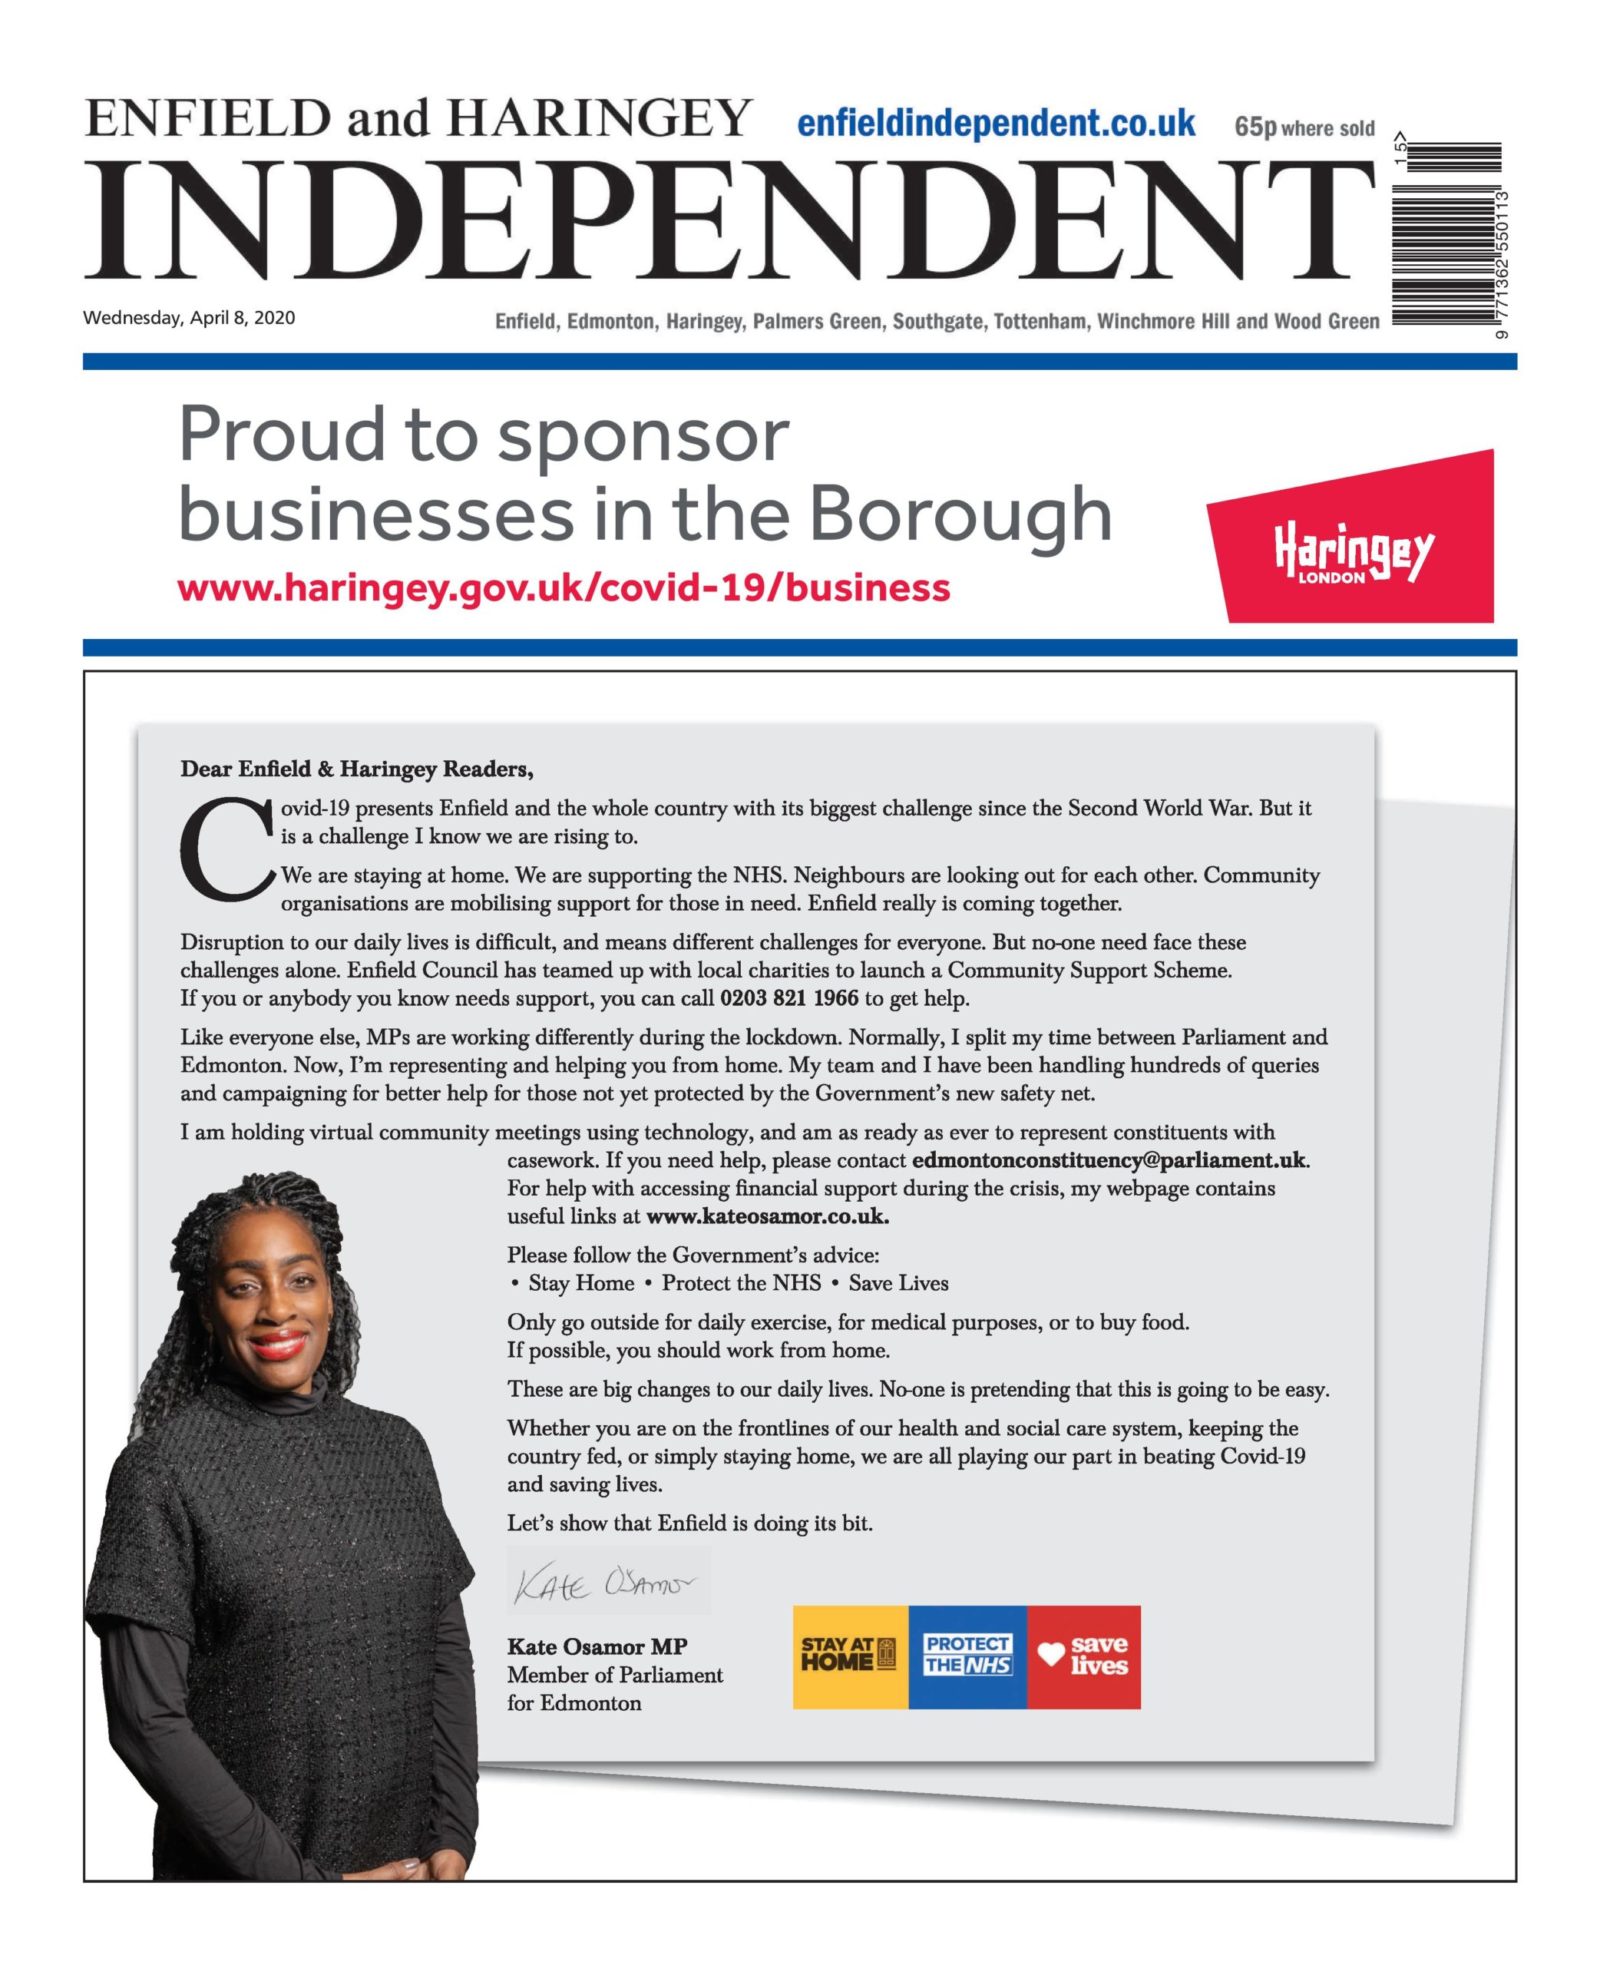 Enfield & Haringey Independent front cover